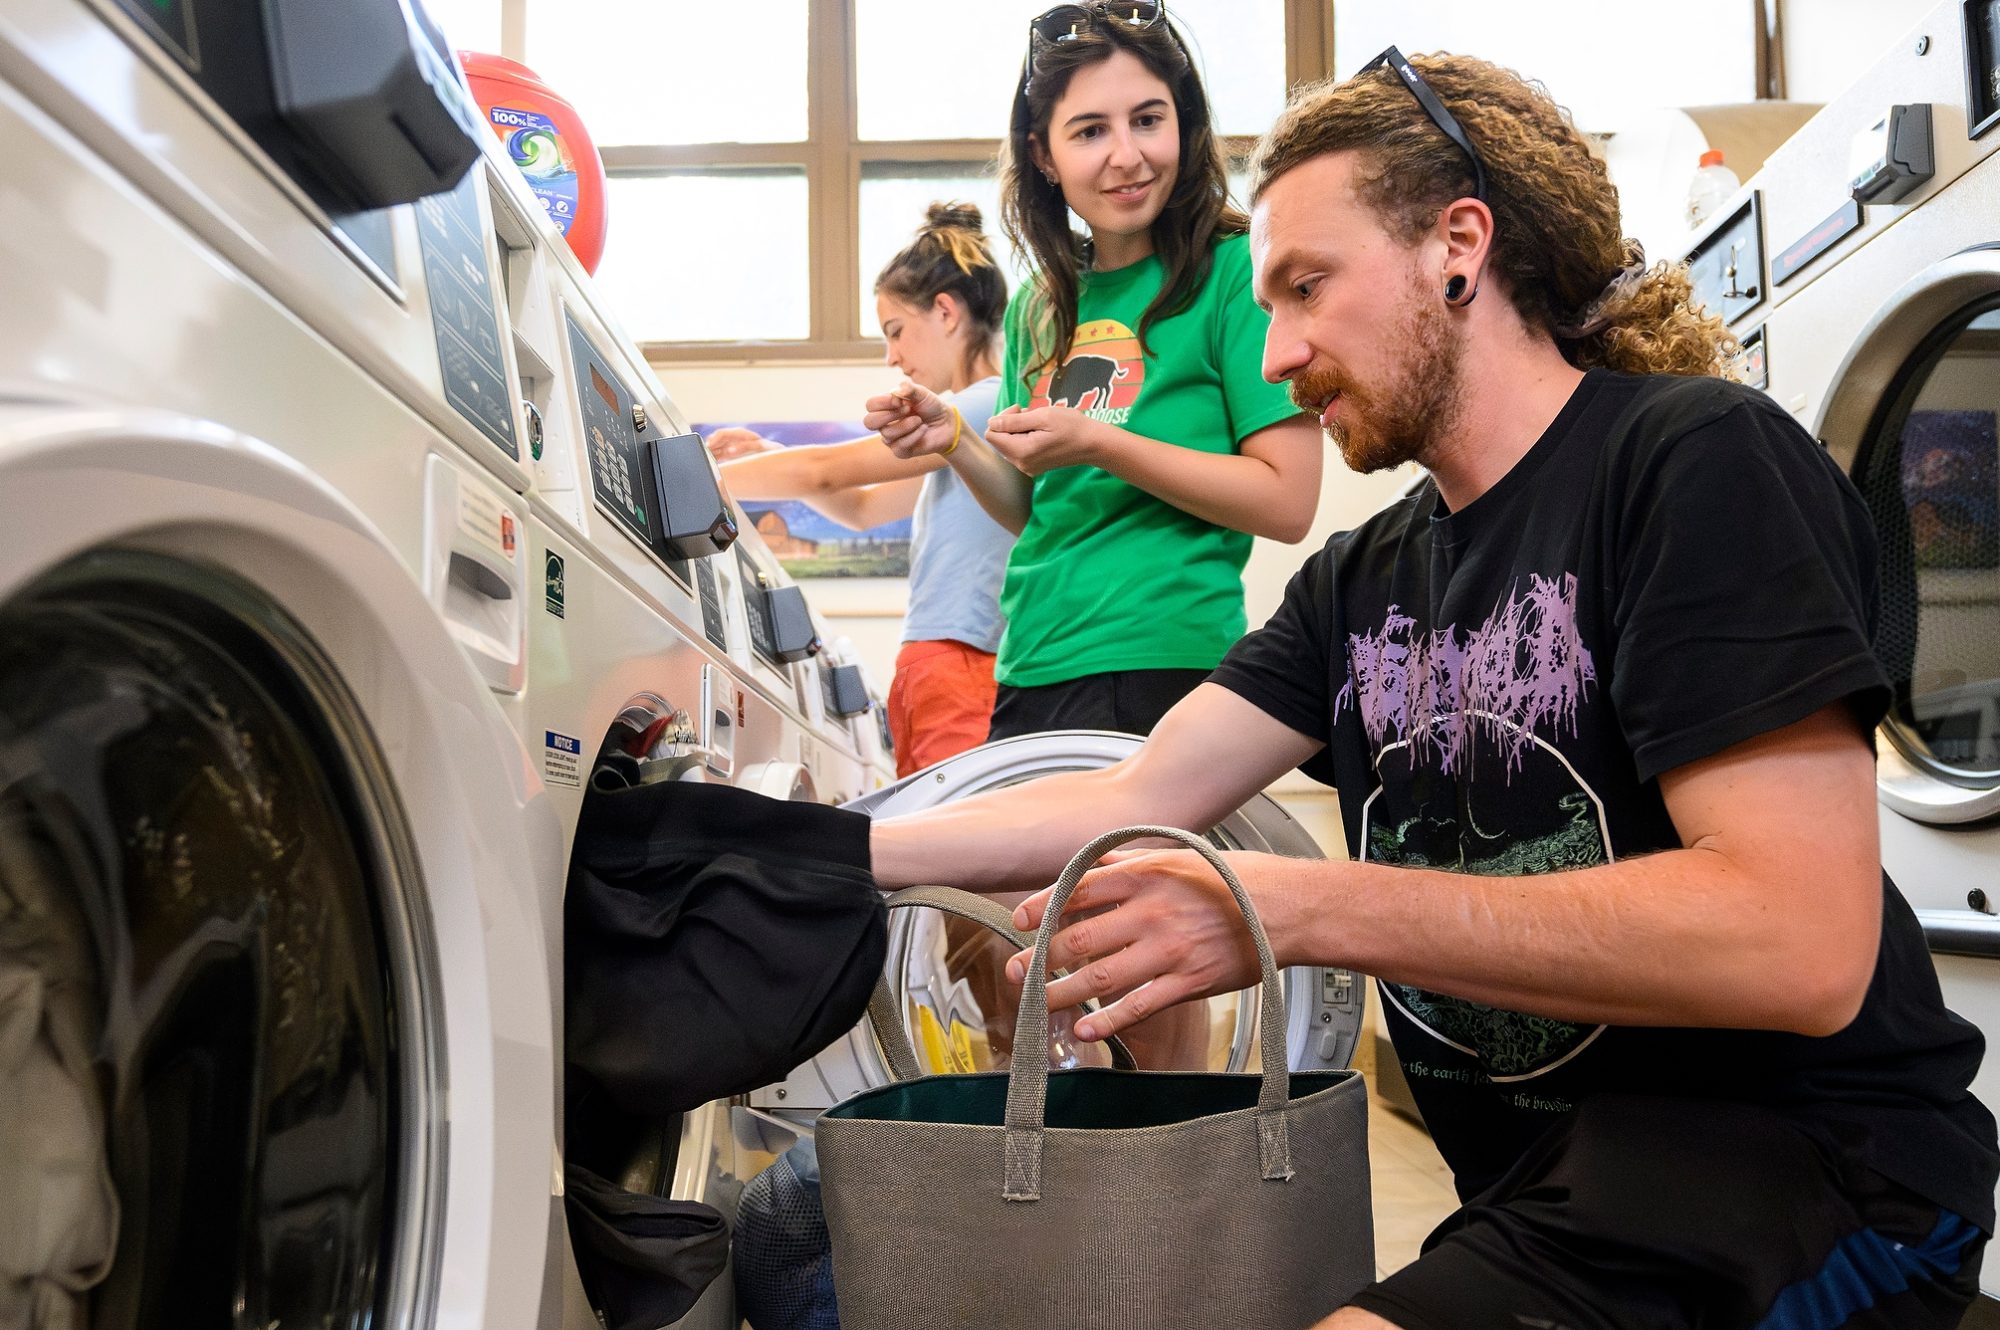 Timon Keller squats down in the foreground to load his laundry into a washing machine at a laundromat lined with washer and dryers. Behind him, Arielle Link and Lucy McGuire also prepare to put their own laundry into machines.